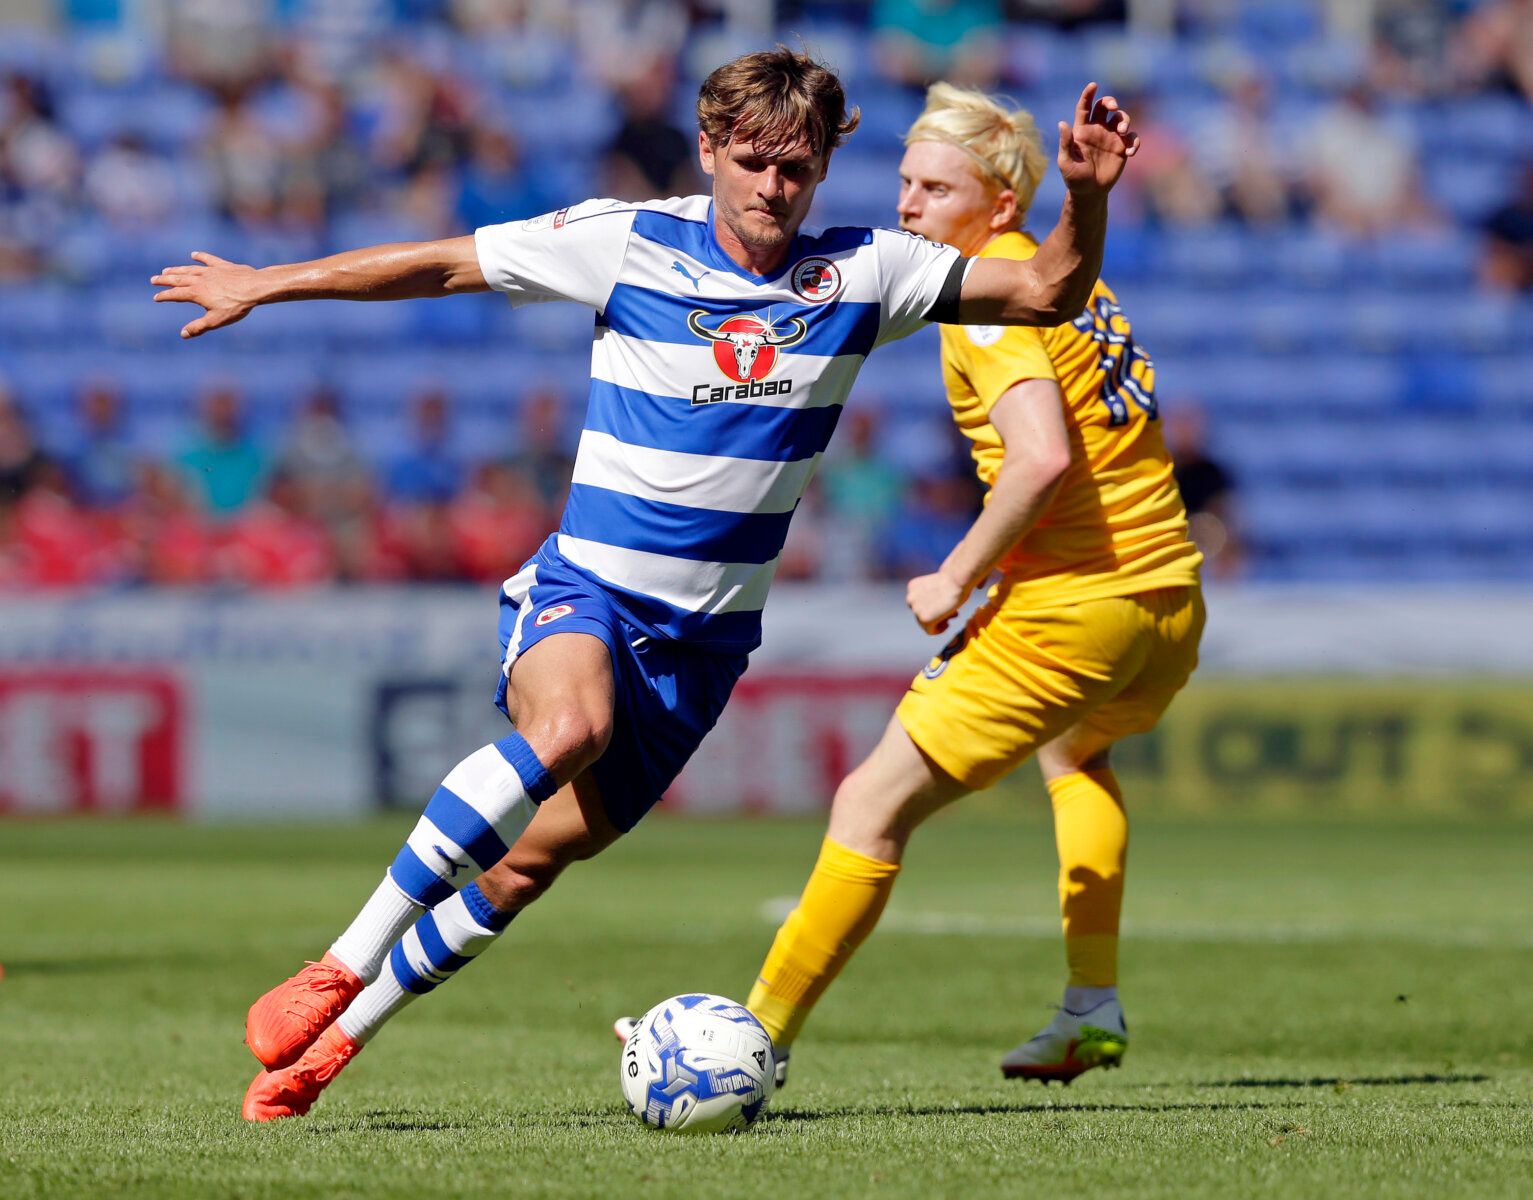 Football Soccer Britain - Reading v Preston North End - Sky Bet Championship - The Madejski Stadium - 6/8/16 
John Swift of Reading  
Mandatory Credit: Action Images / Henry Browne 
Livepic 
EDITORIAL USE ONLY.